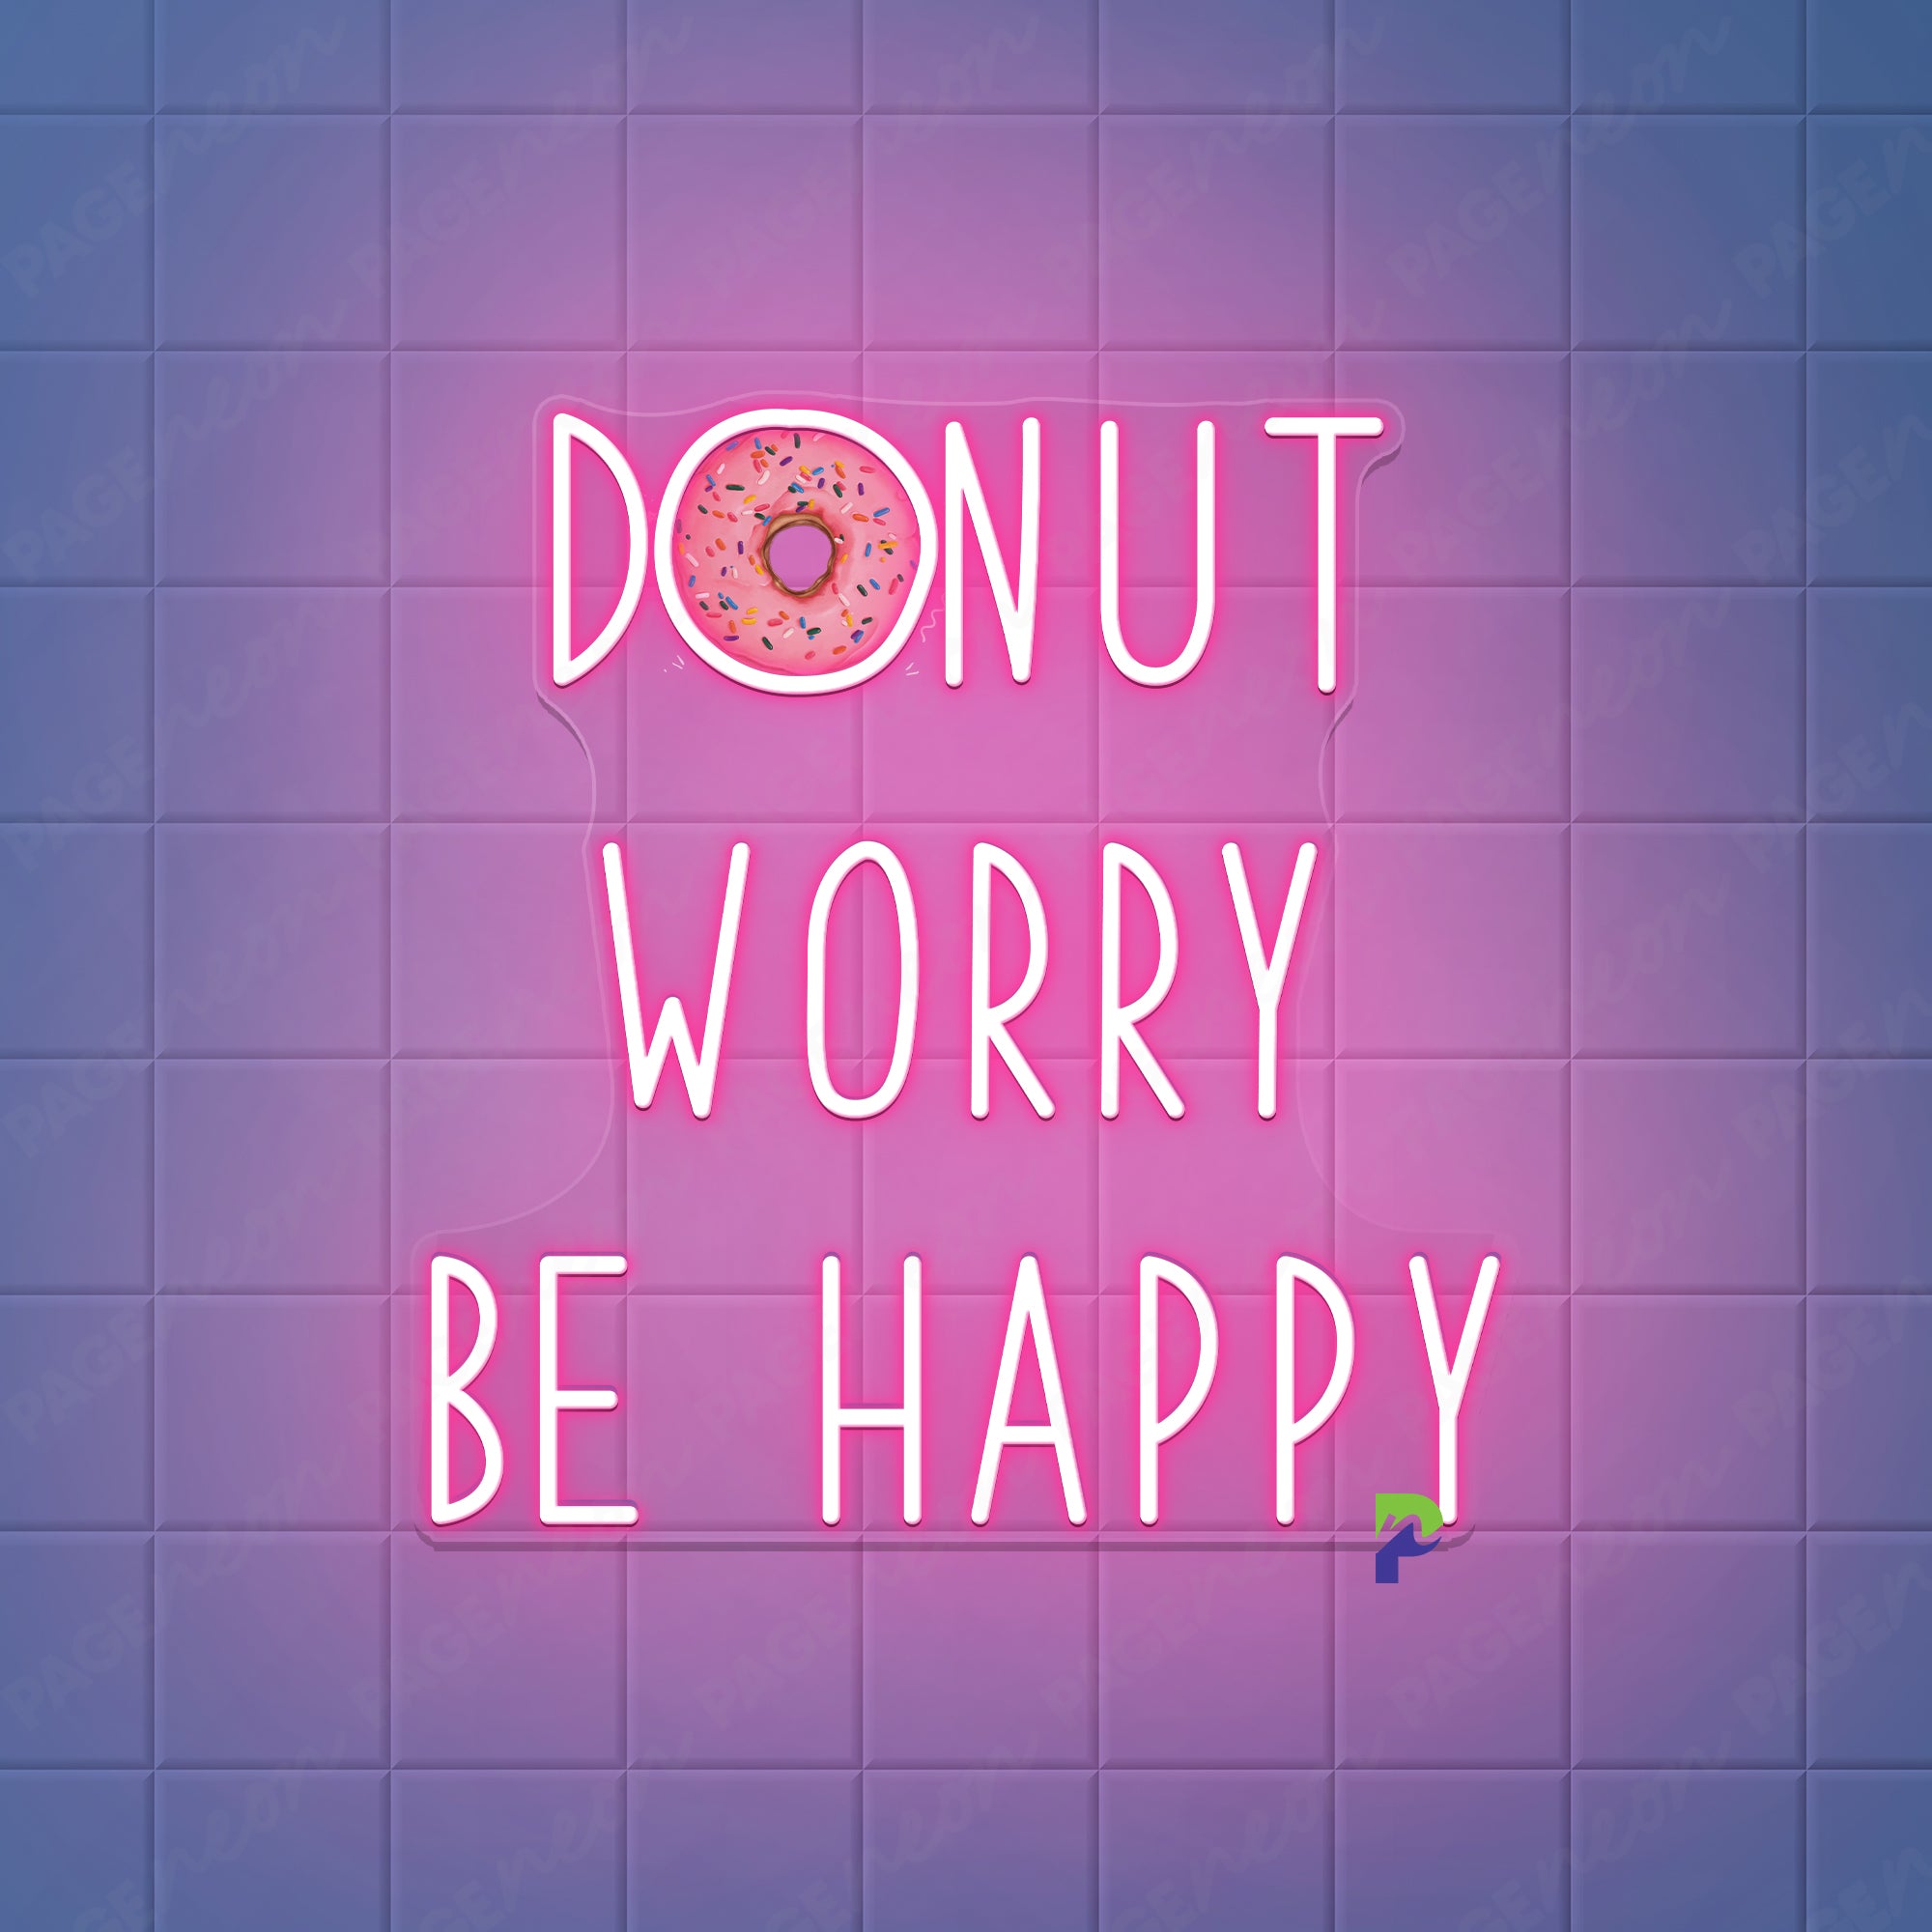 Donut Worry Be Happy Neon Sign Led Light